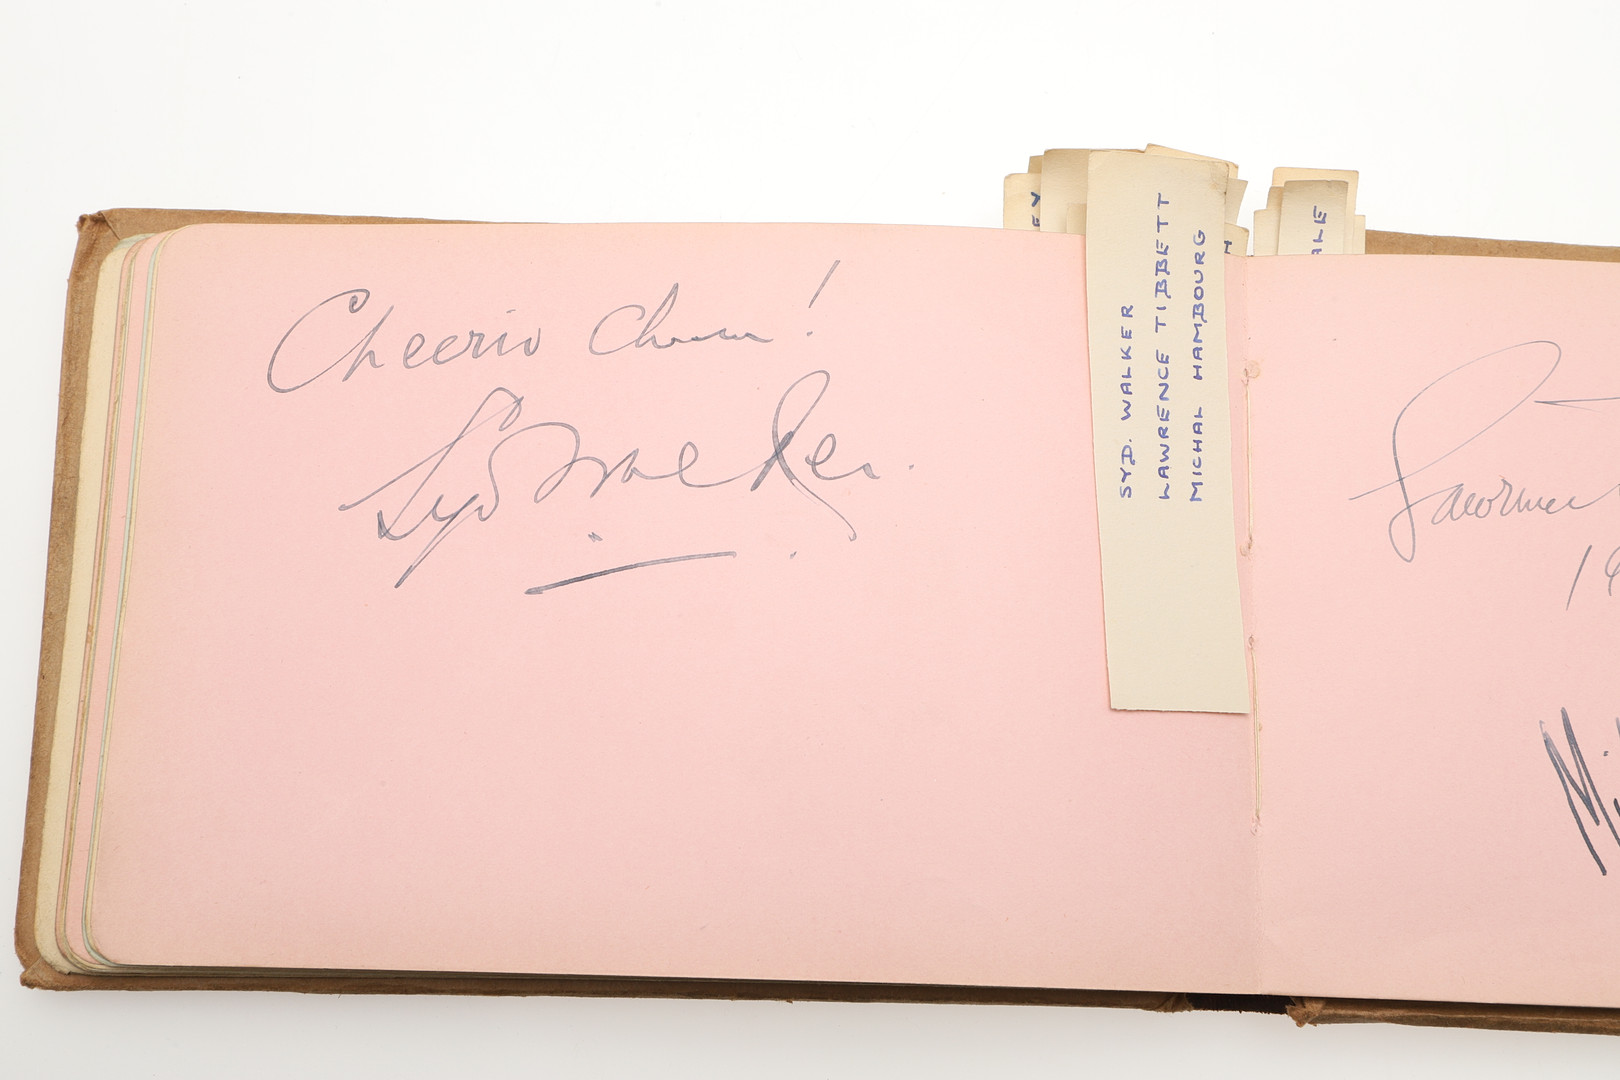 LARGE AUTOGRAPH COLLECTION - WINSTON CHURCHILL & OTHER AUTOGRAPHS. - Image 31 of 63